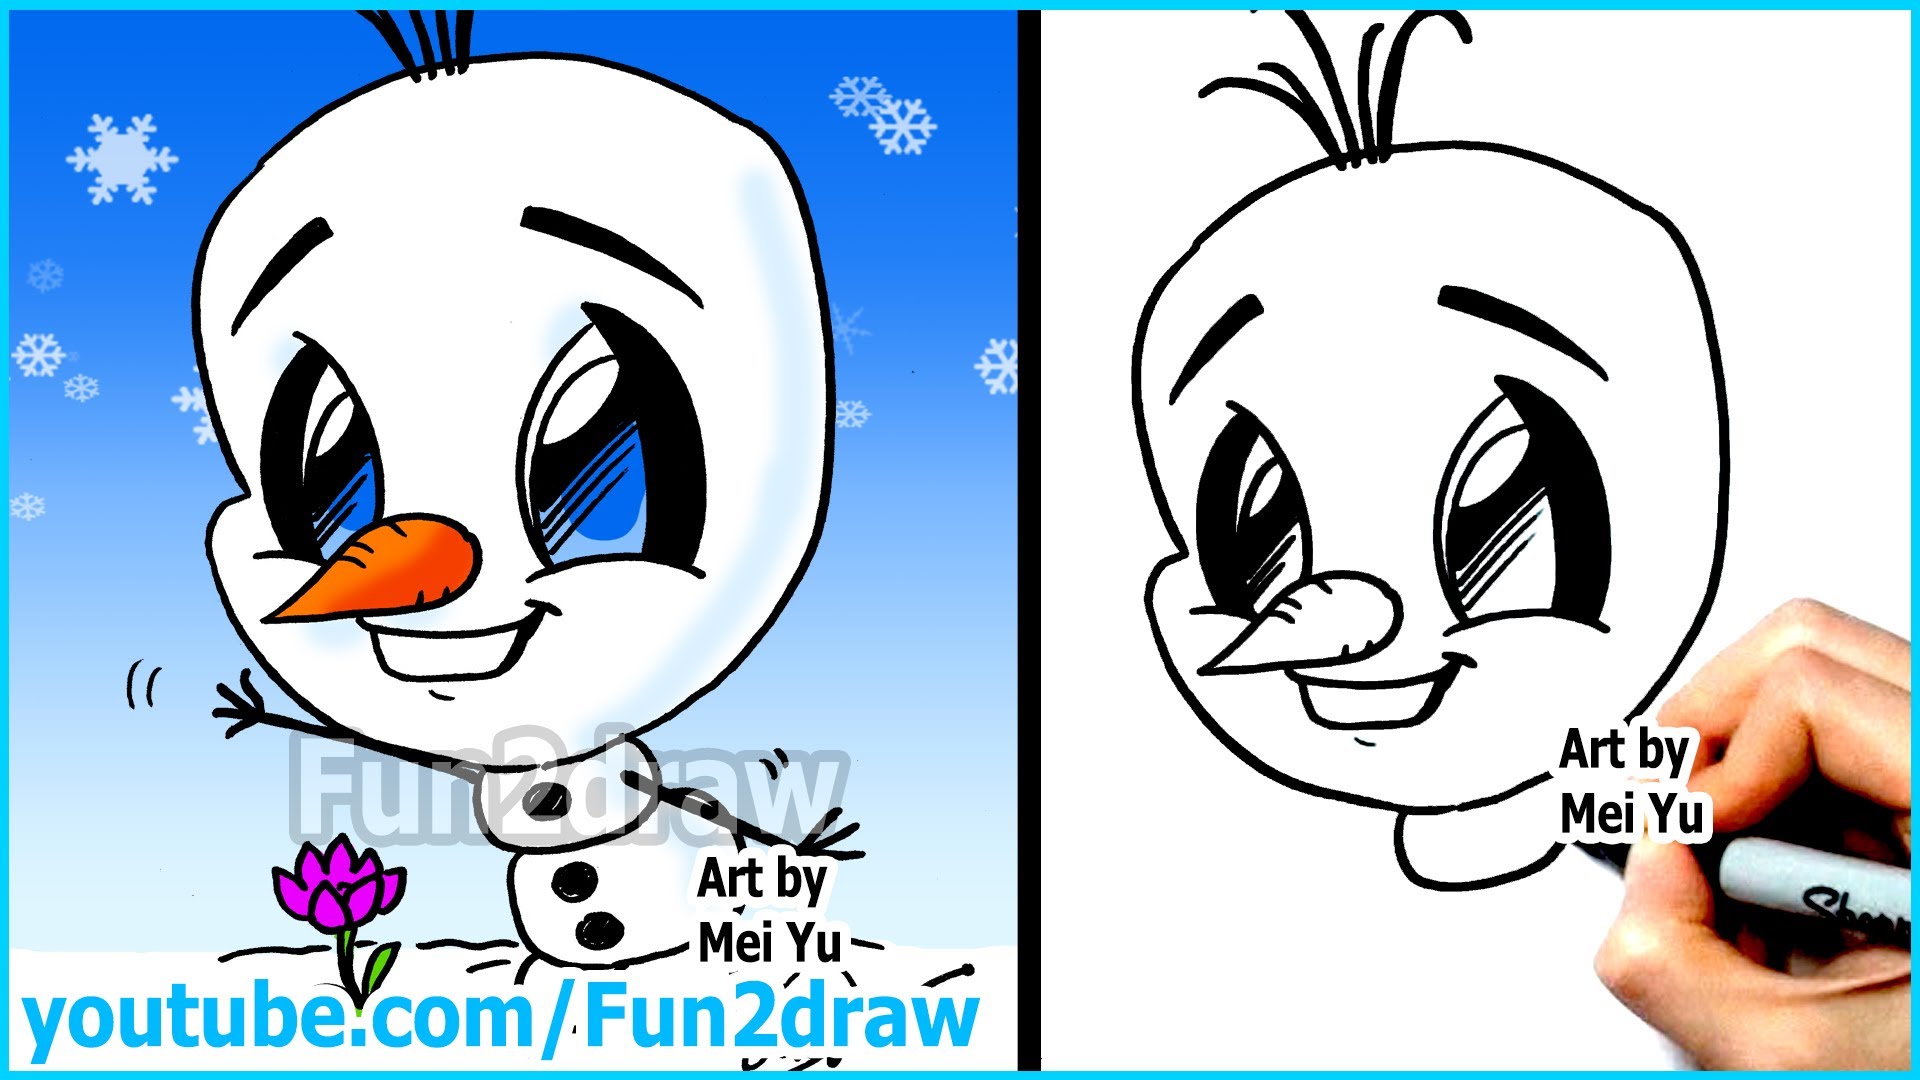 How to Draw Disney Characters - Olaf from Frozen - Fun2draw cartoon ...